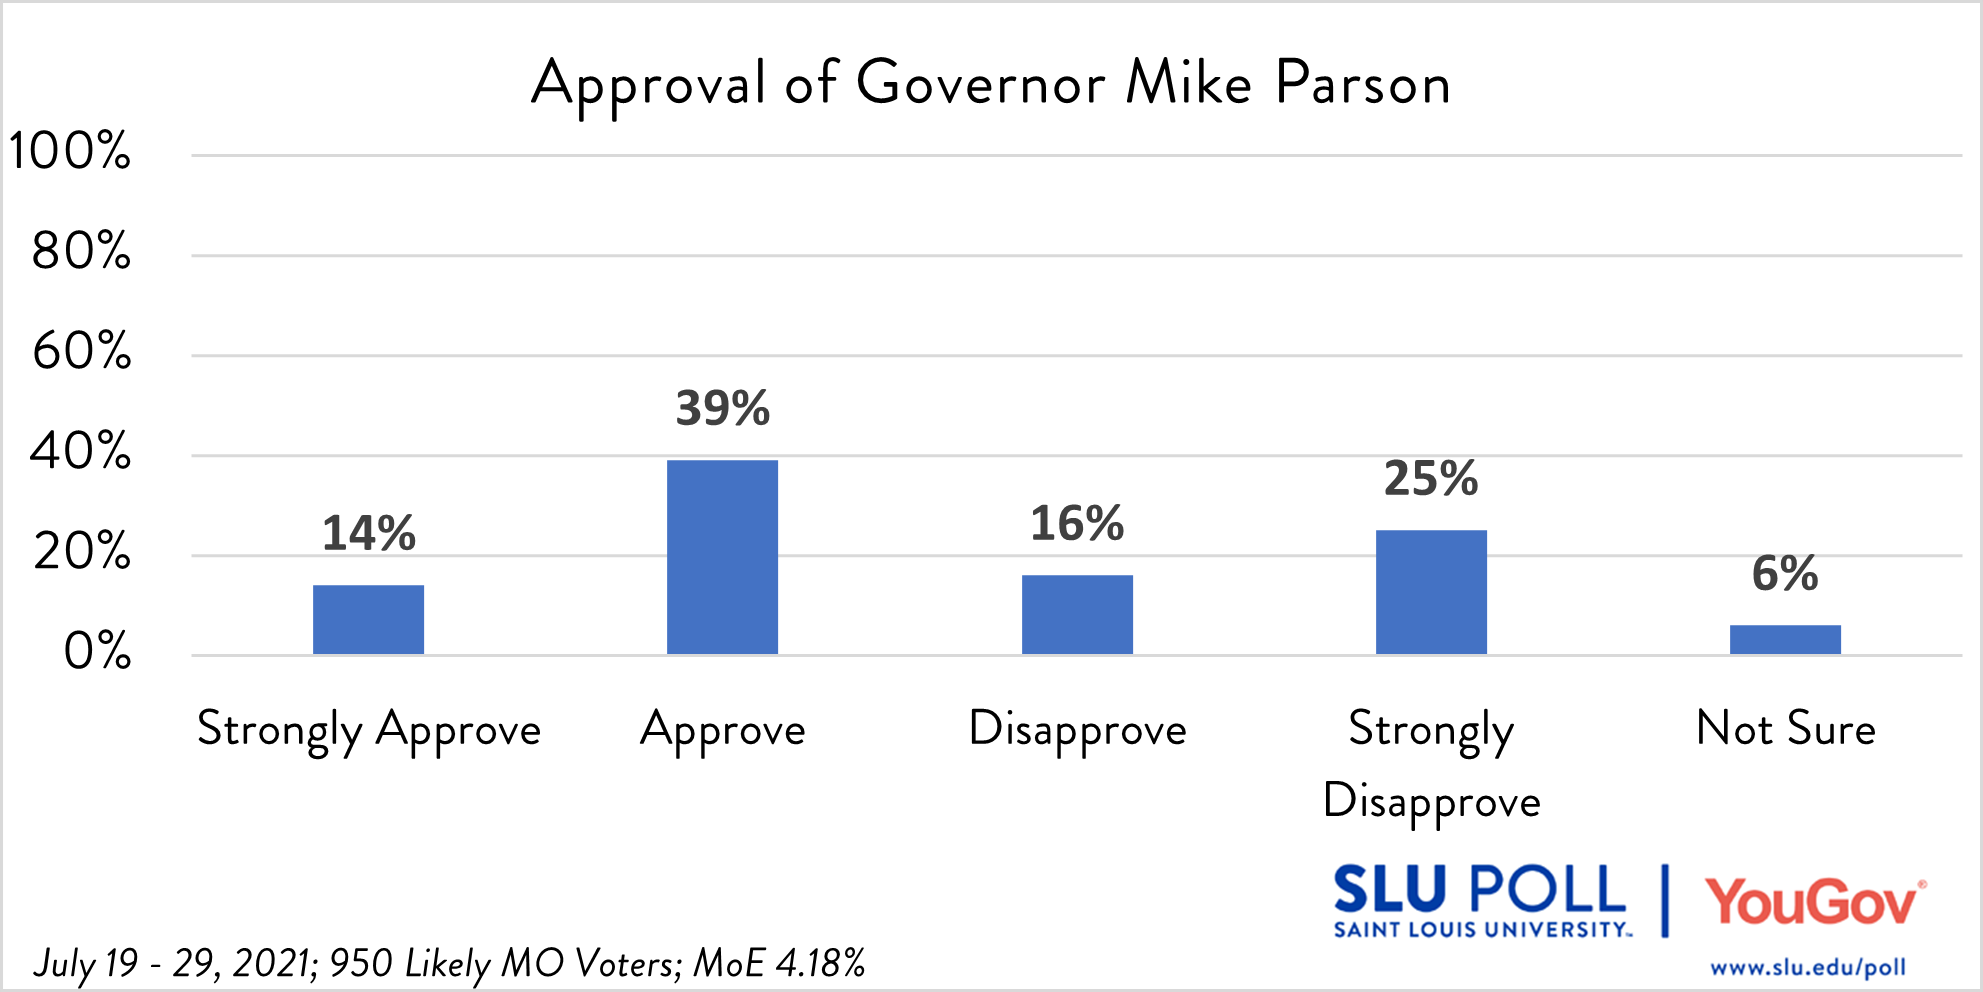 Do you approve or disapprove of the way each is doing their job…Governor Mike Parson?  - Strongly Approve: 14% - Approve: 39% - Disapprove: 16% - Strongly Disapprove: 25%  - Not Sure: 6%